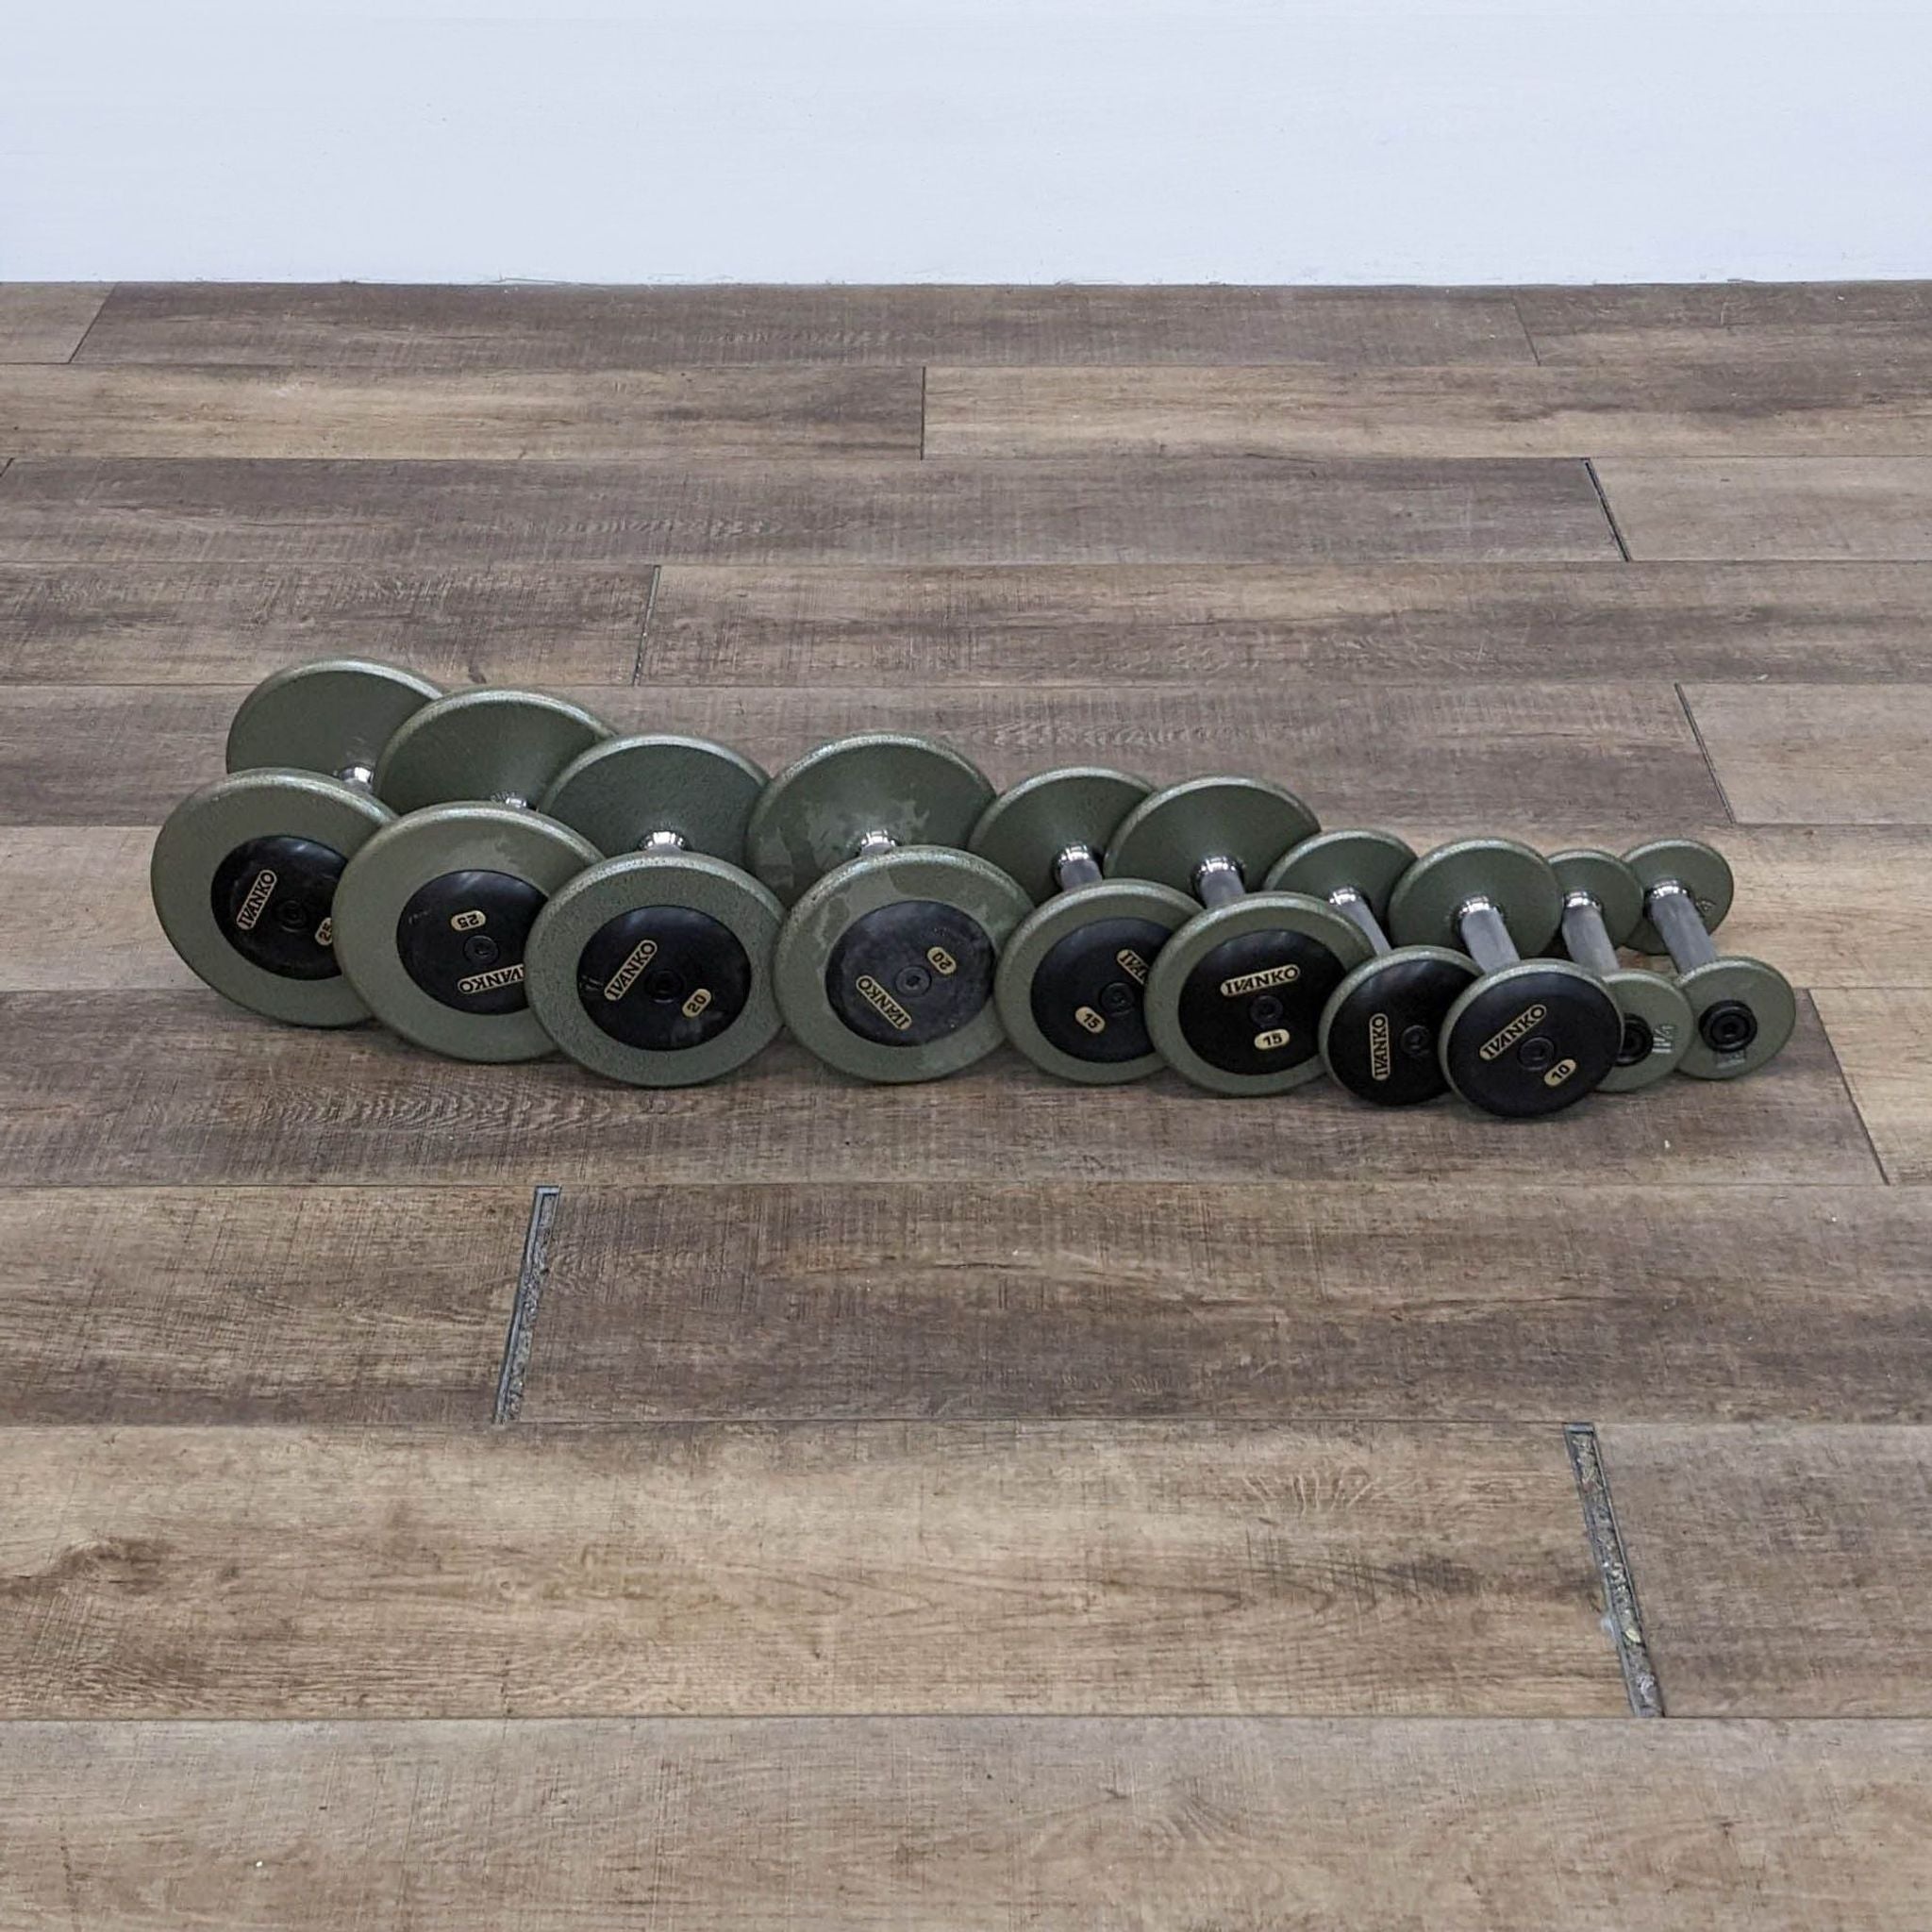 Ivanko gym dumbbells neatly lined up, showcasing different weights on a textured wooden surface.